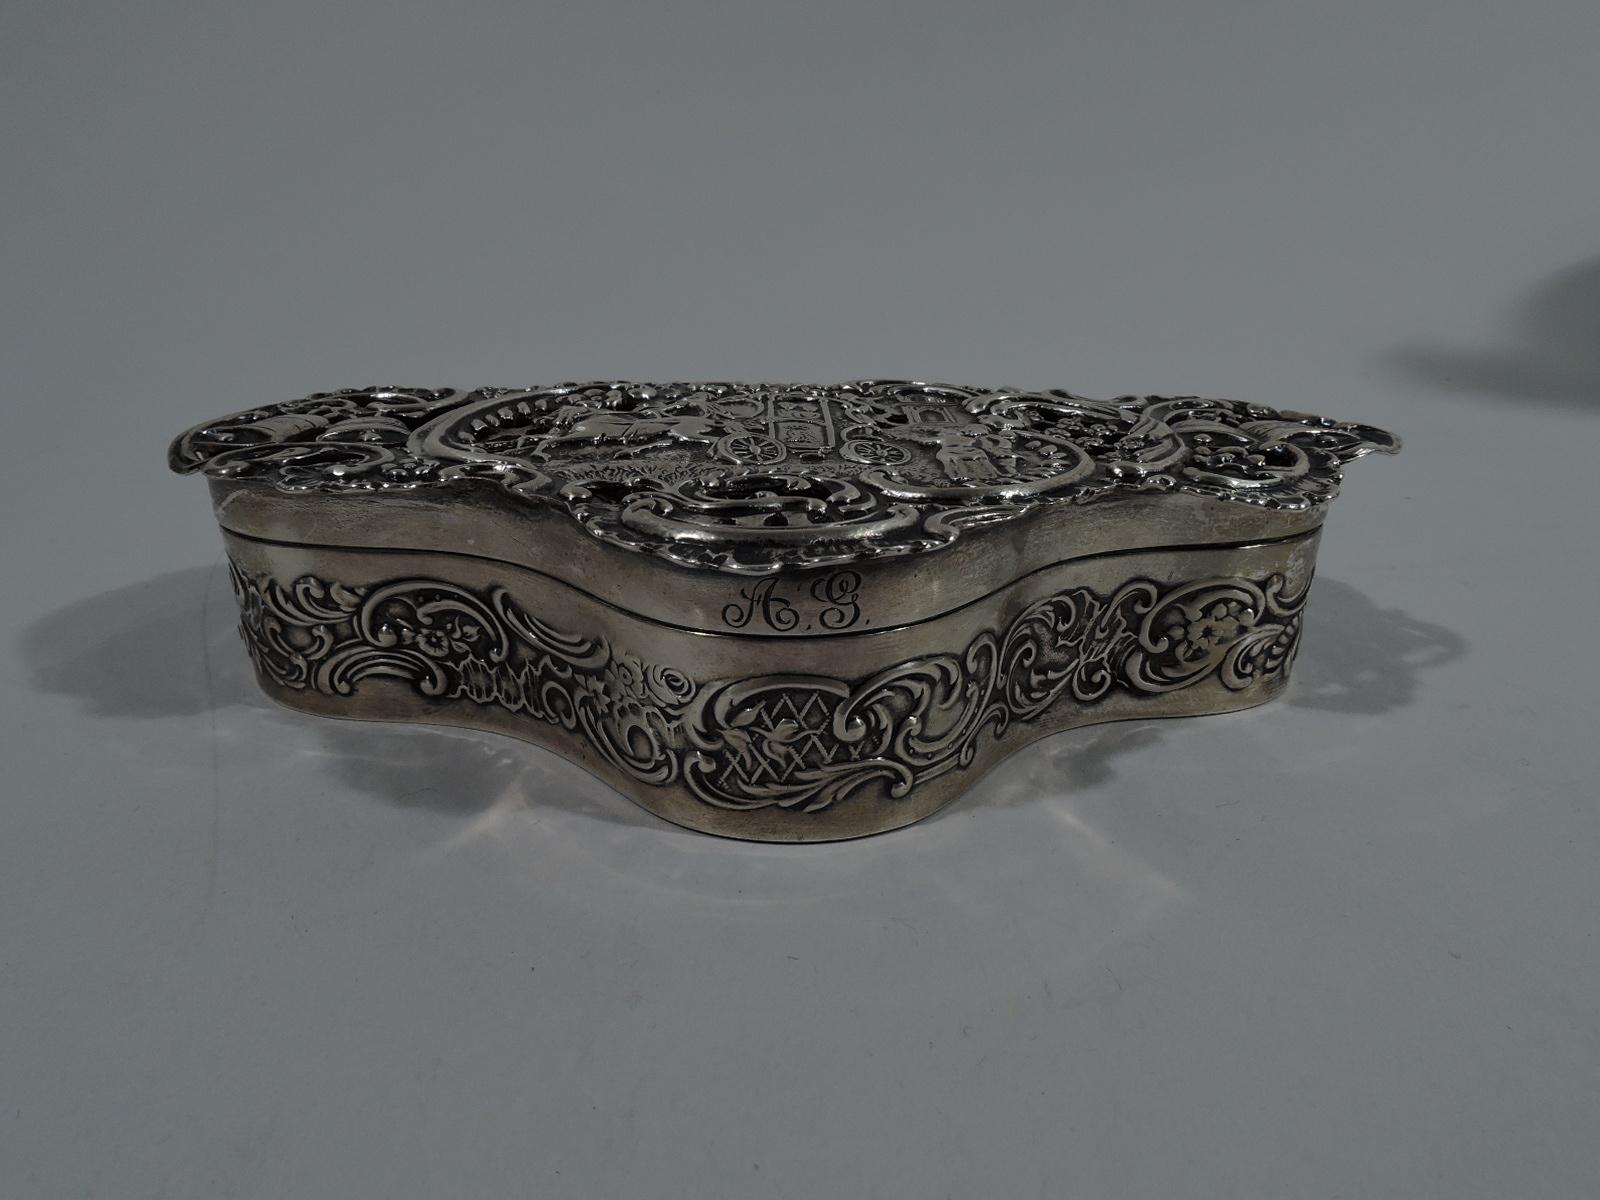 Edwardian sterling silver box with Georgian coaching days scene. Made by William Comyns in London in 1905. Shaped trefoil with chased and pierced ornament. Sides have scroll-and-flower band. Overhanging cover with royal coach waved on by loyal